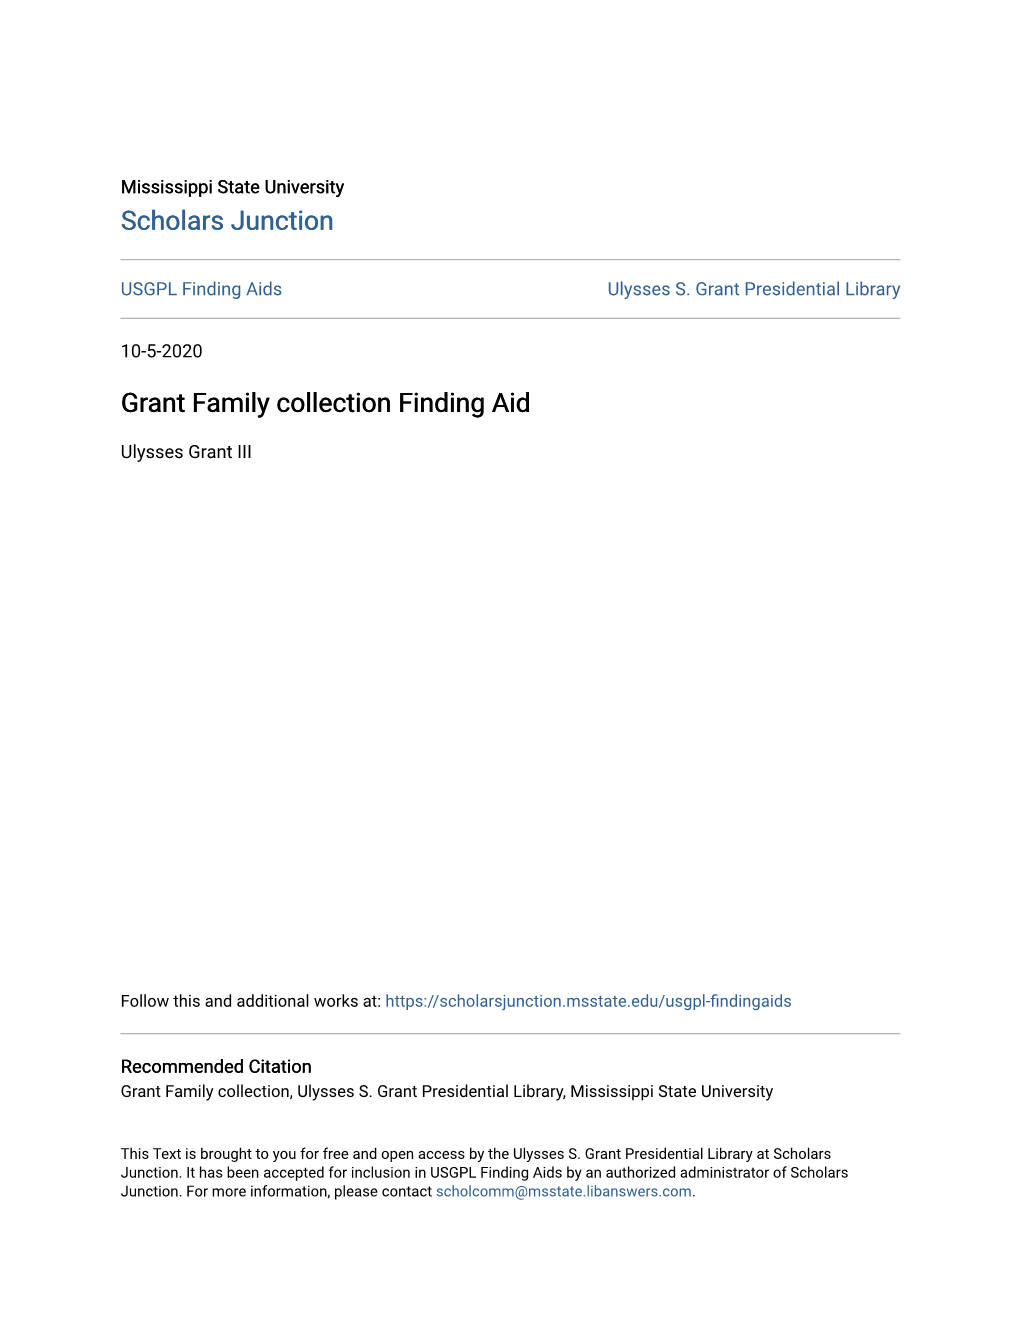 Grant Family Collection Finding Aid